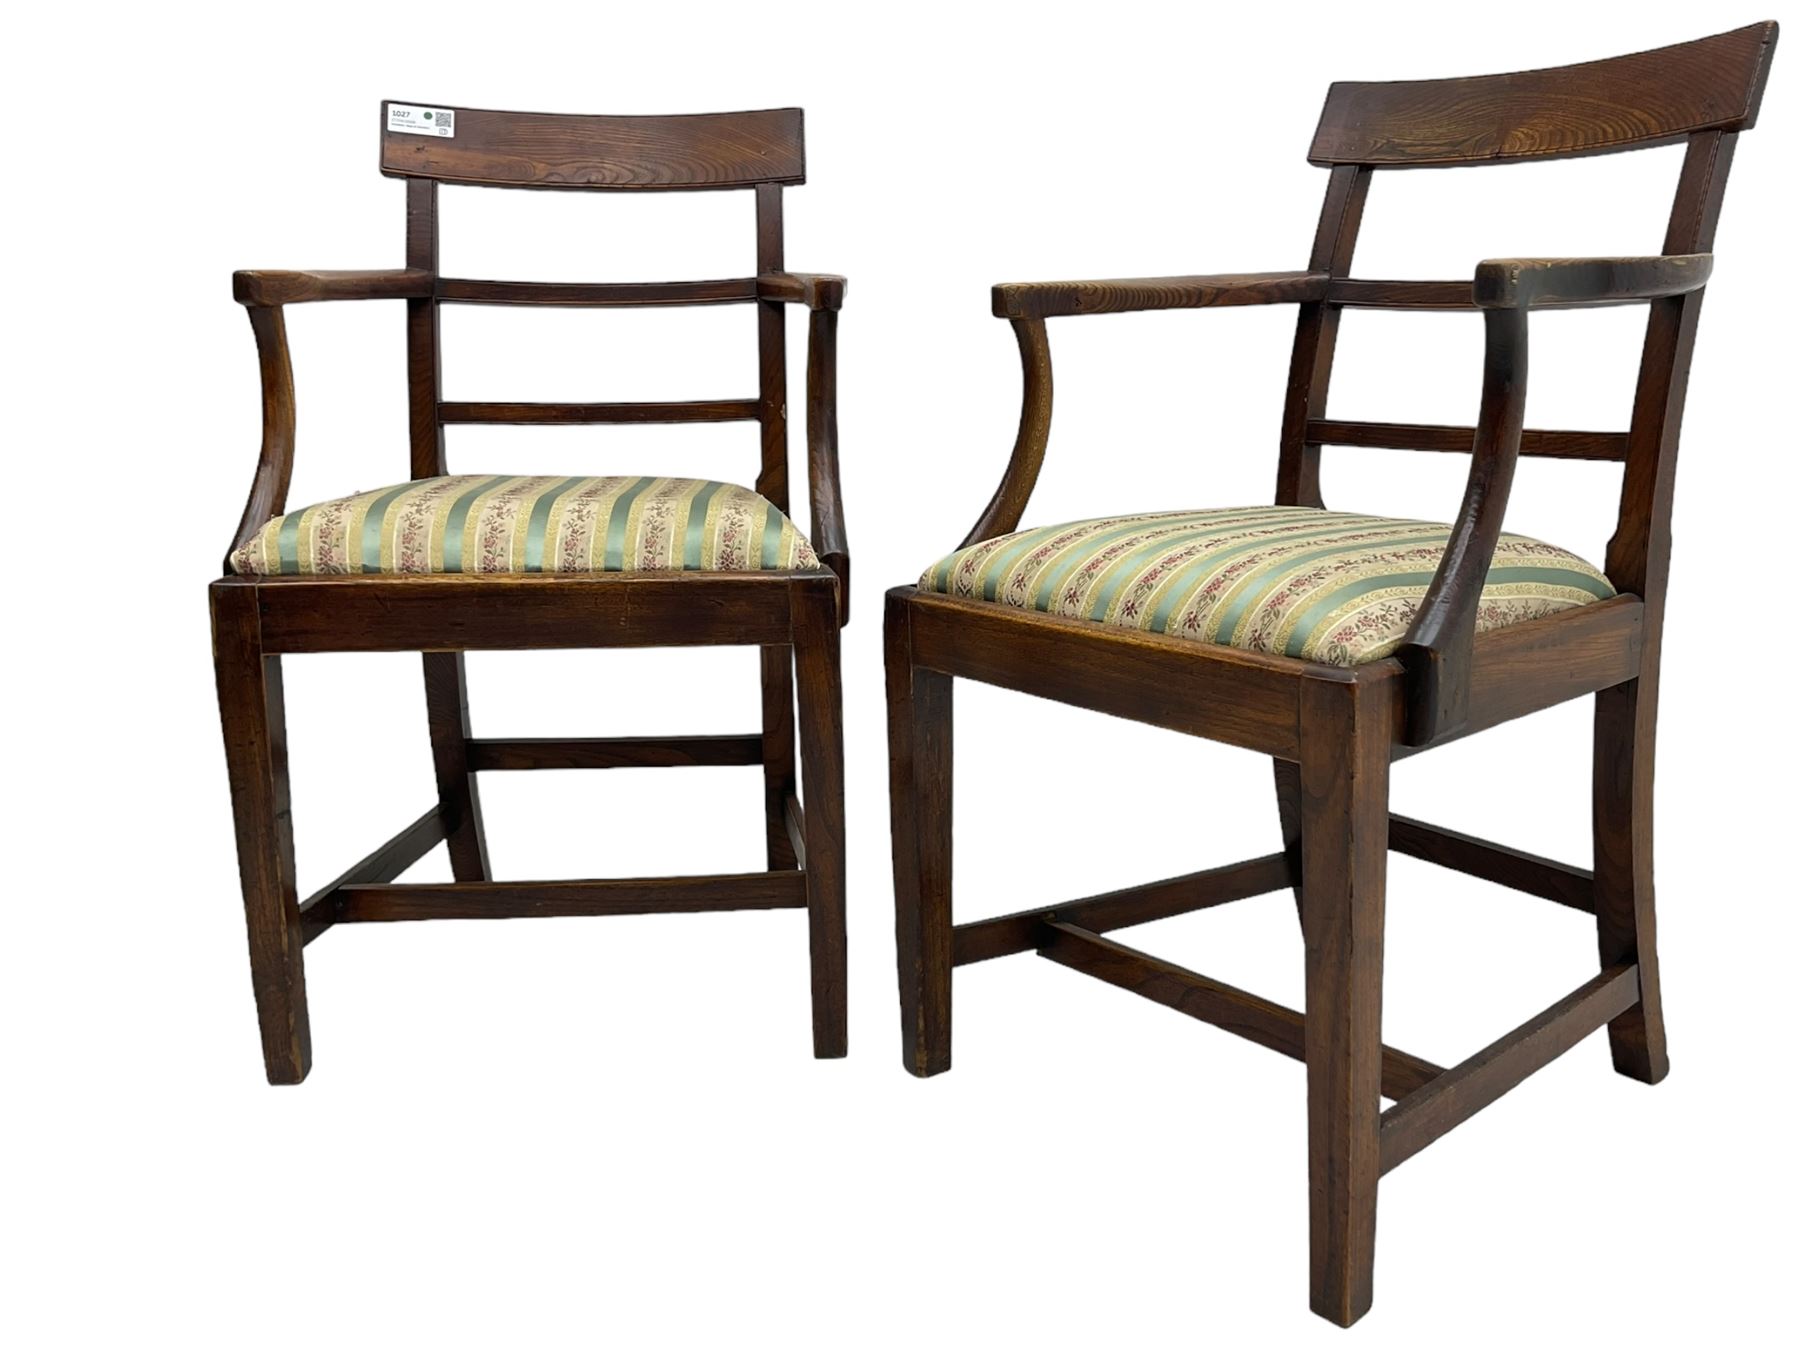 Pair of 19th century elm elbow chairs - Image 2 of 7